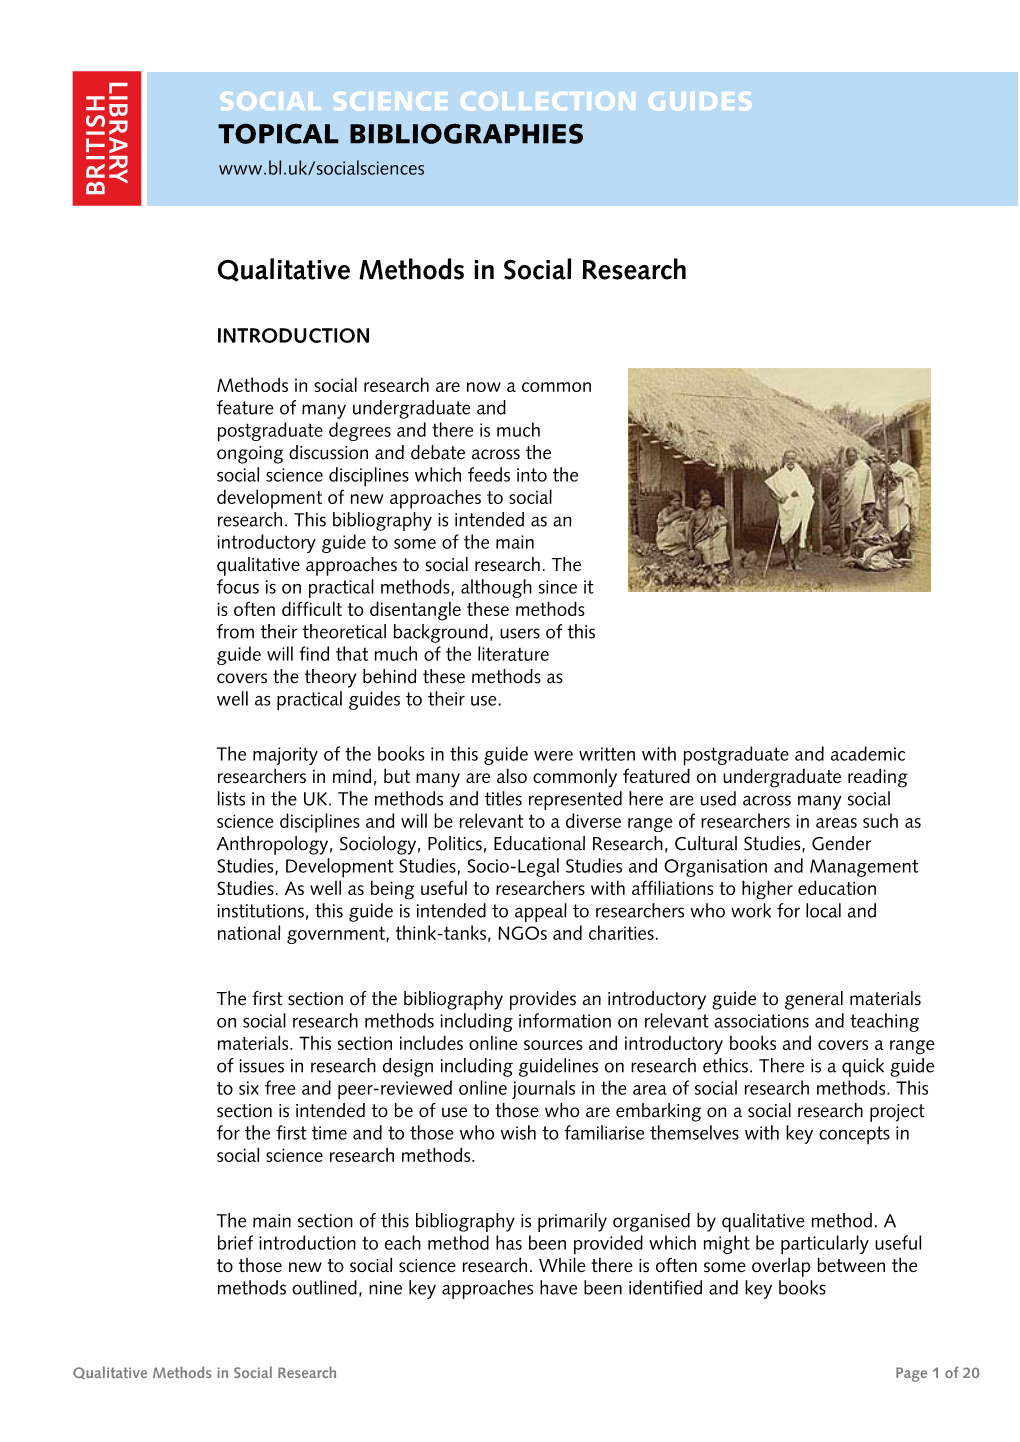 Qualitative Methods in Social Research: Topical Bibliography